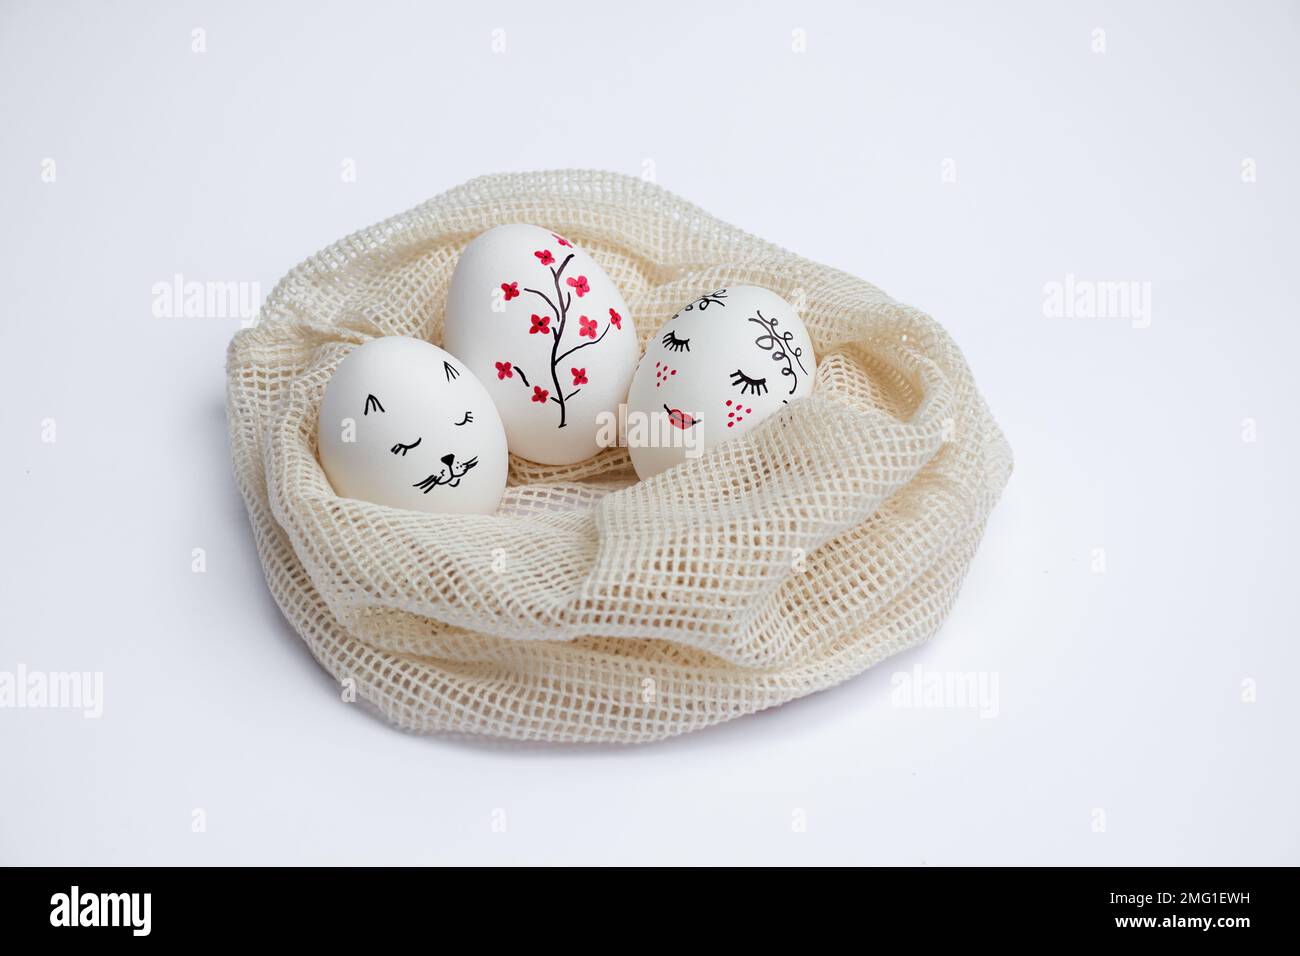 Three beautifully painted Easter eggs lie in environmentally friendly mesh bag on white table. Funny faces and twig with red flowers are painted on eggs. Copy space. Happy holidays Stock Photo